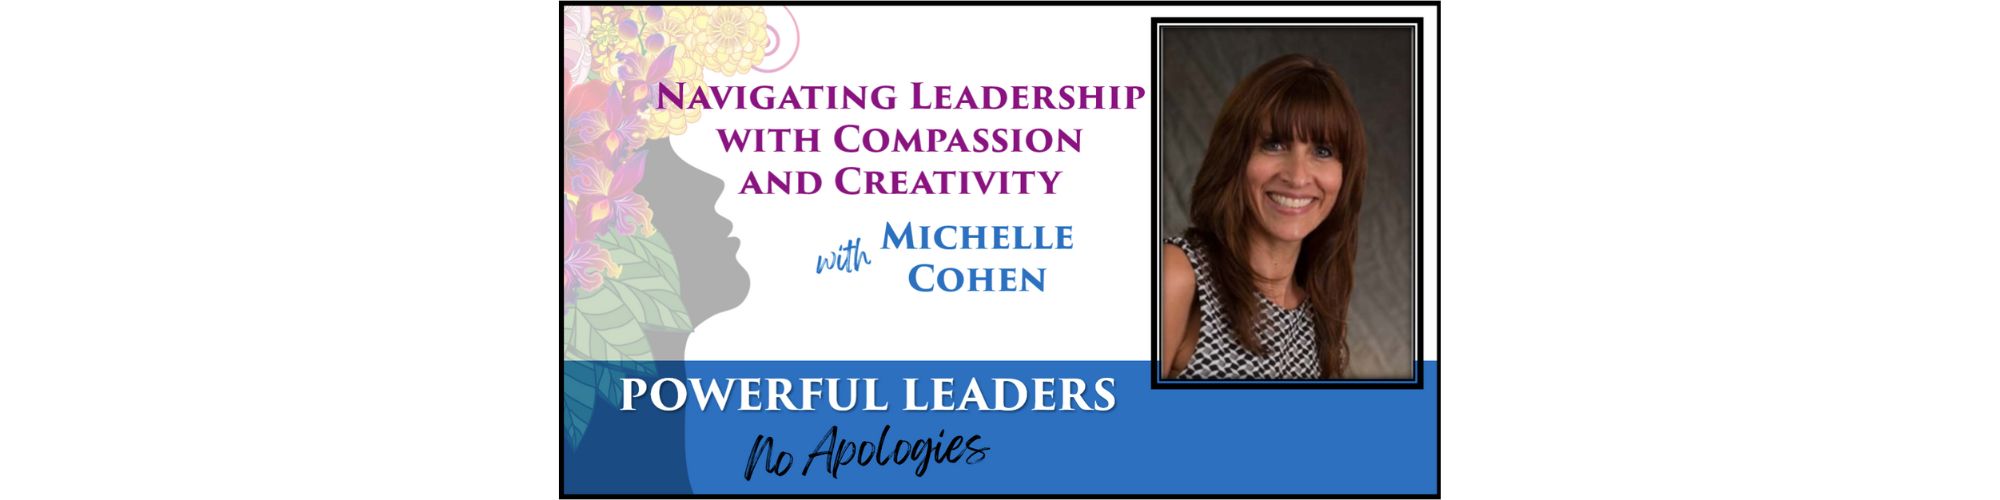 Powerful Leaders, No Apologies Episode 21 Podcast Banner